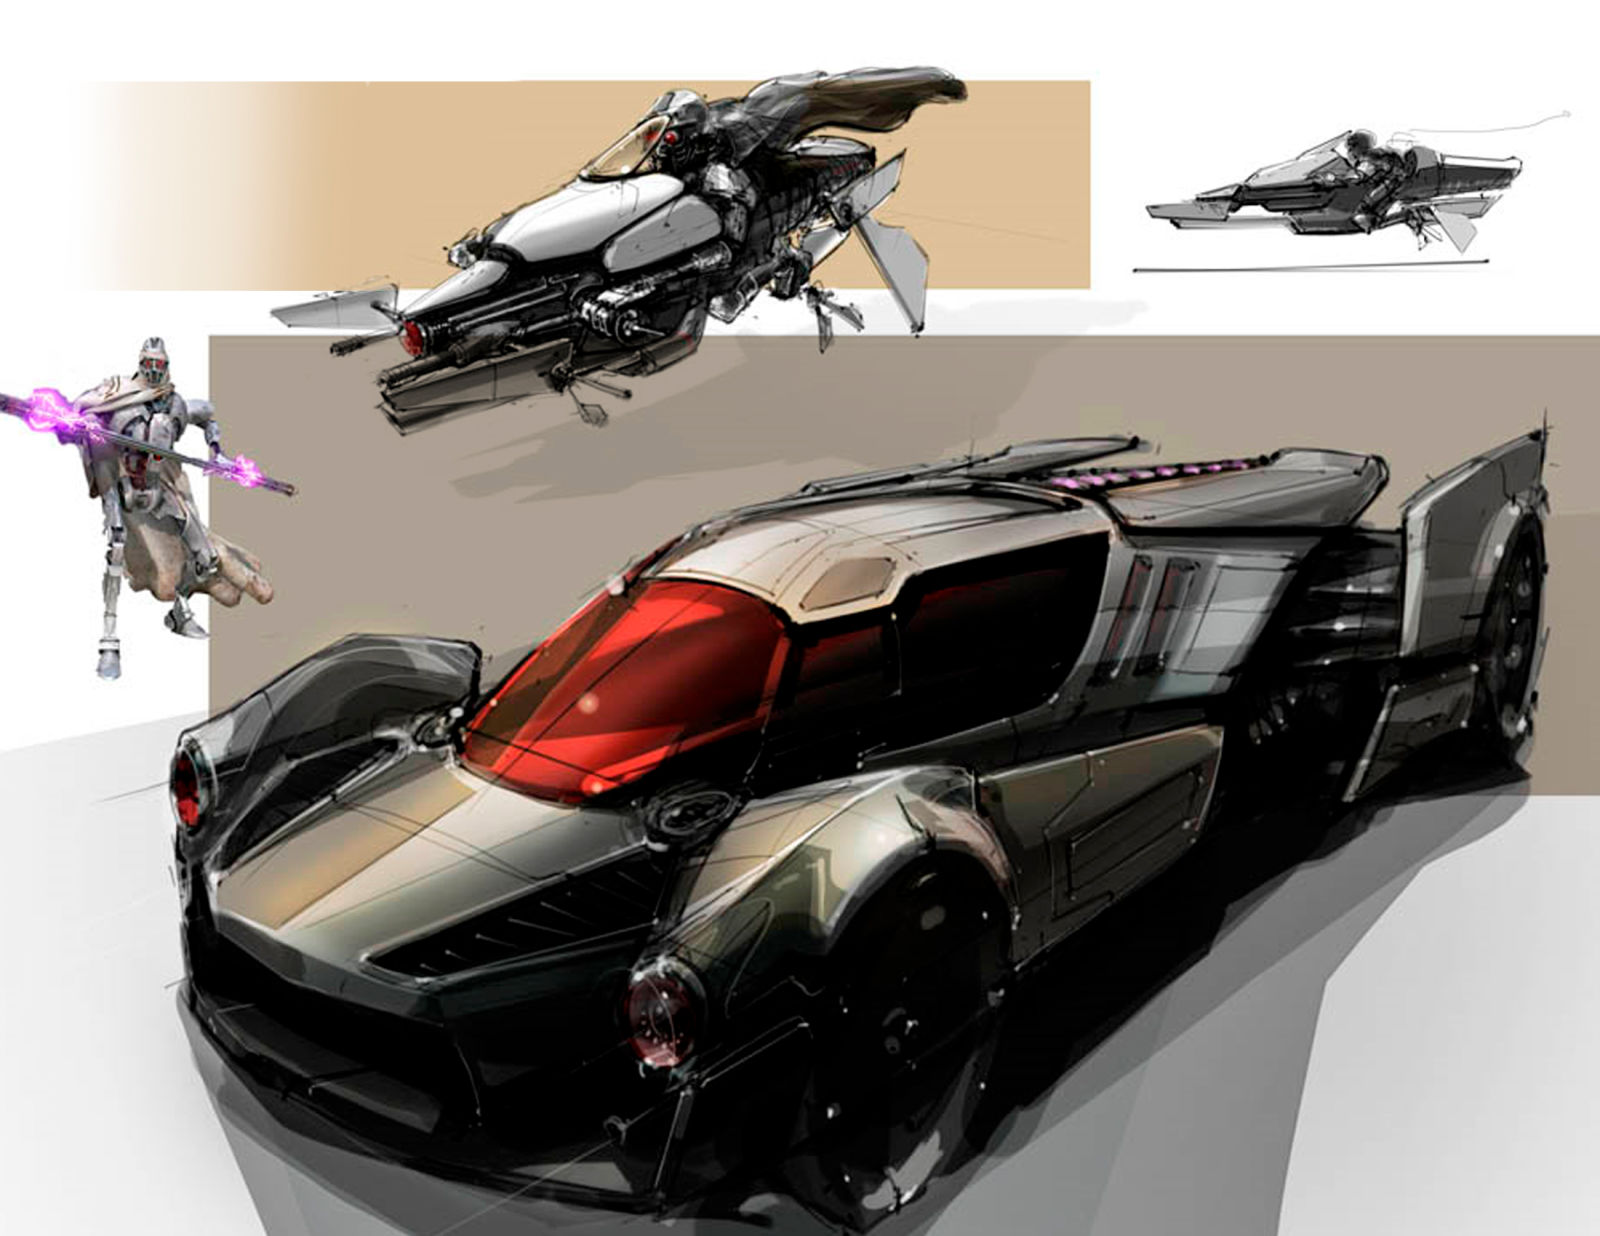 Illustration for article titled Do you like cars? Do you like Star Wars? Of course you do.